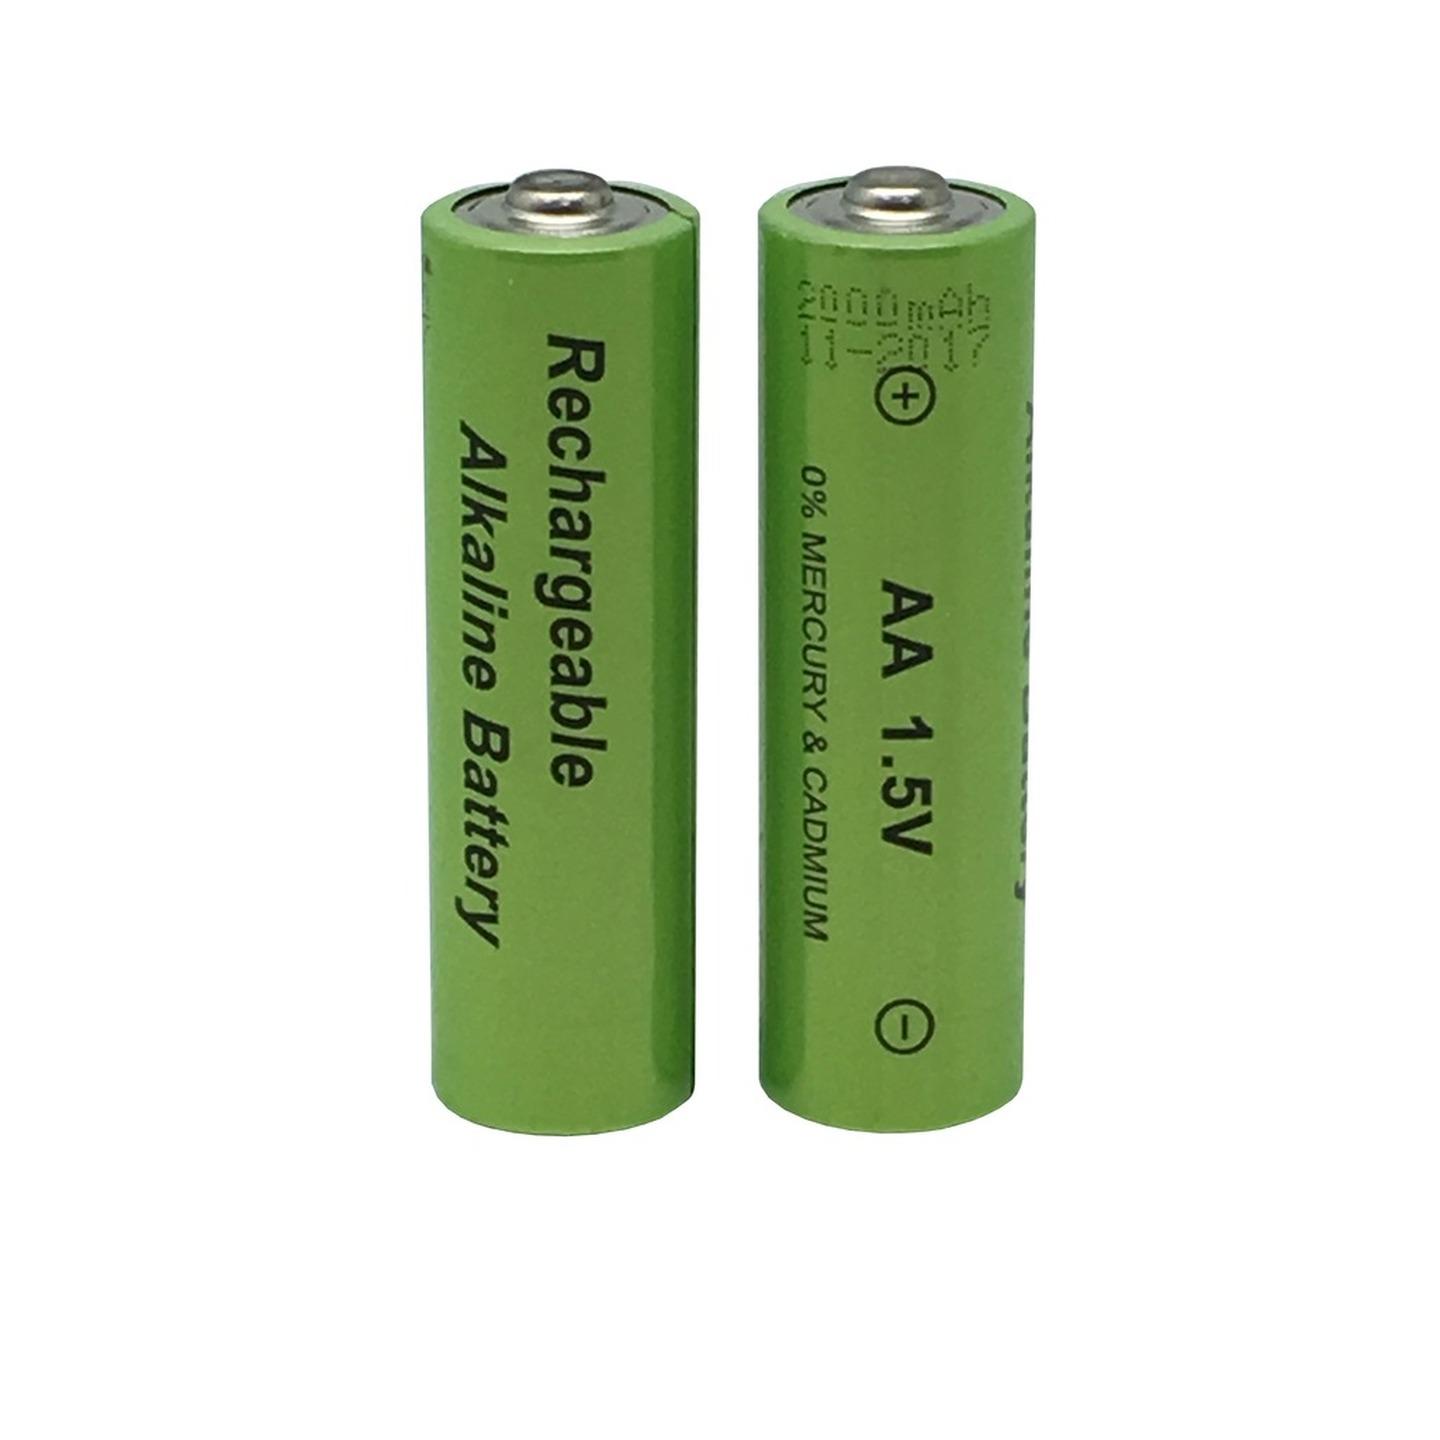 Rechargeable 1.5V Alkaline Batteries To suit XC0346/48 Weather Stations